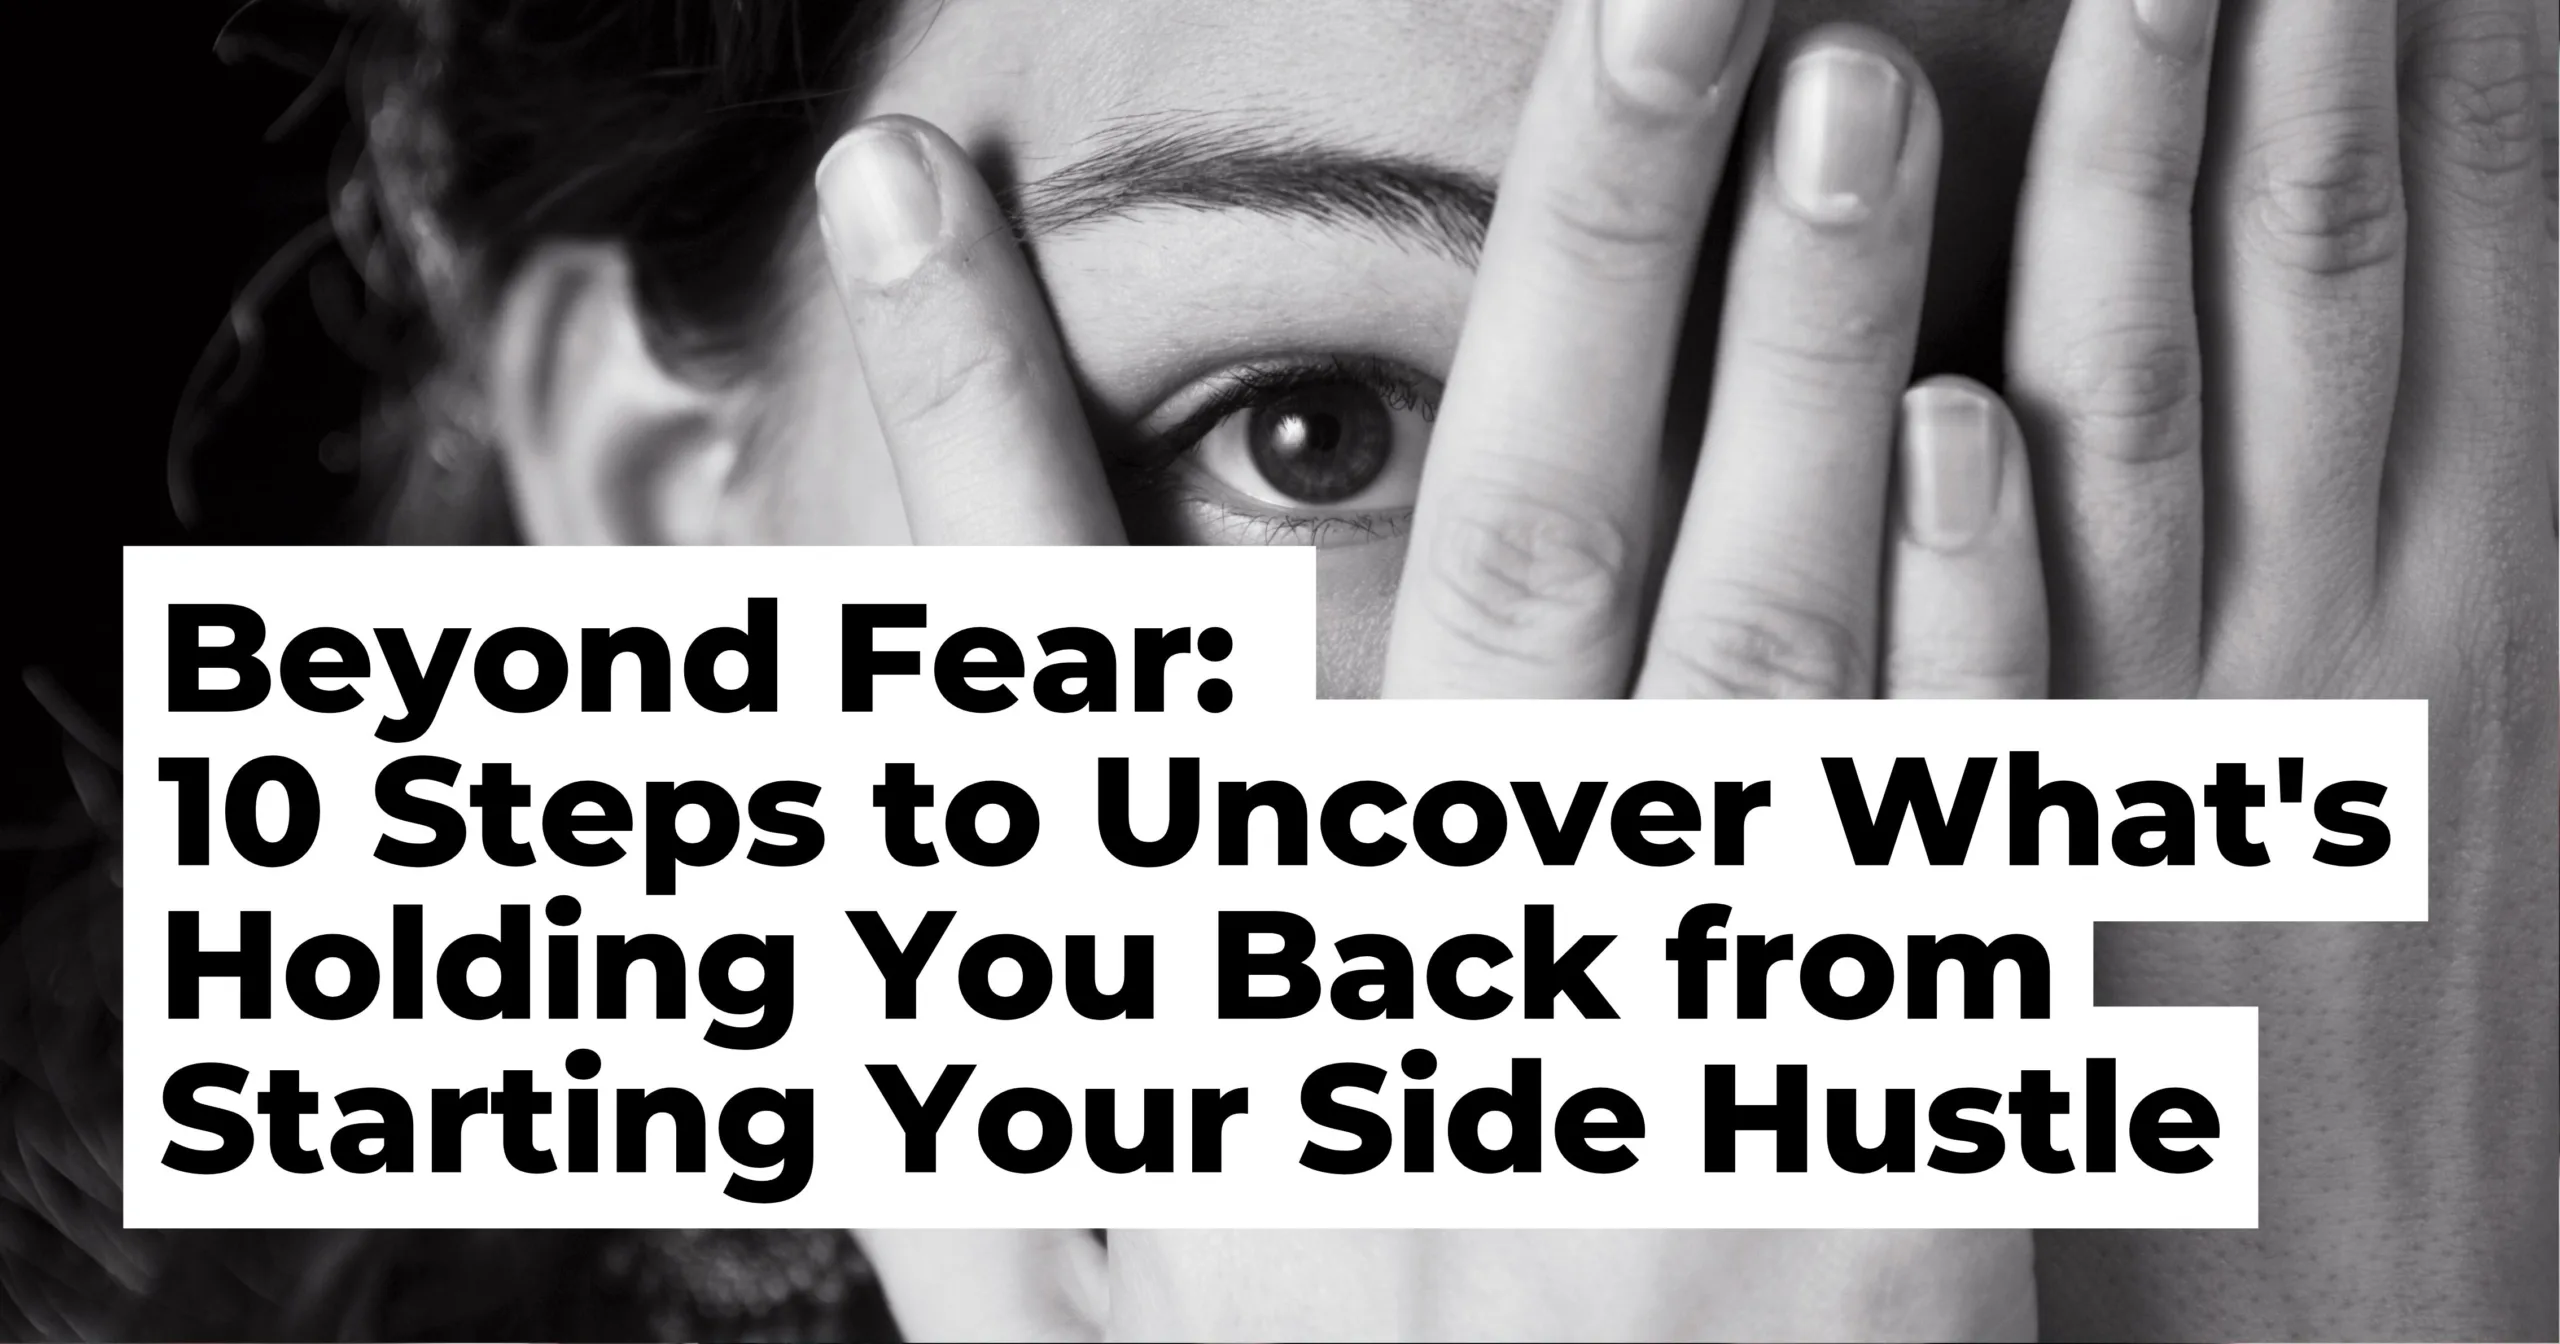 Beyond Fear: 10 Steps to Uncover What’s Holding You Back from Starting Your Hustle